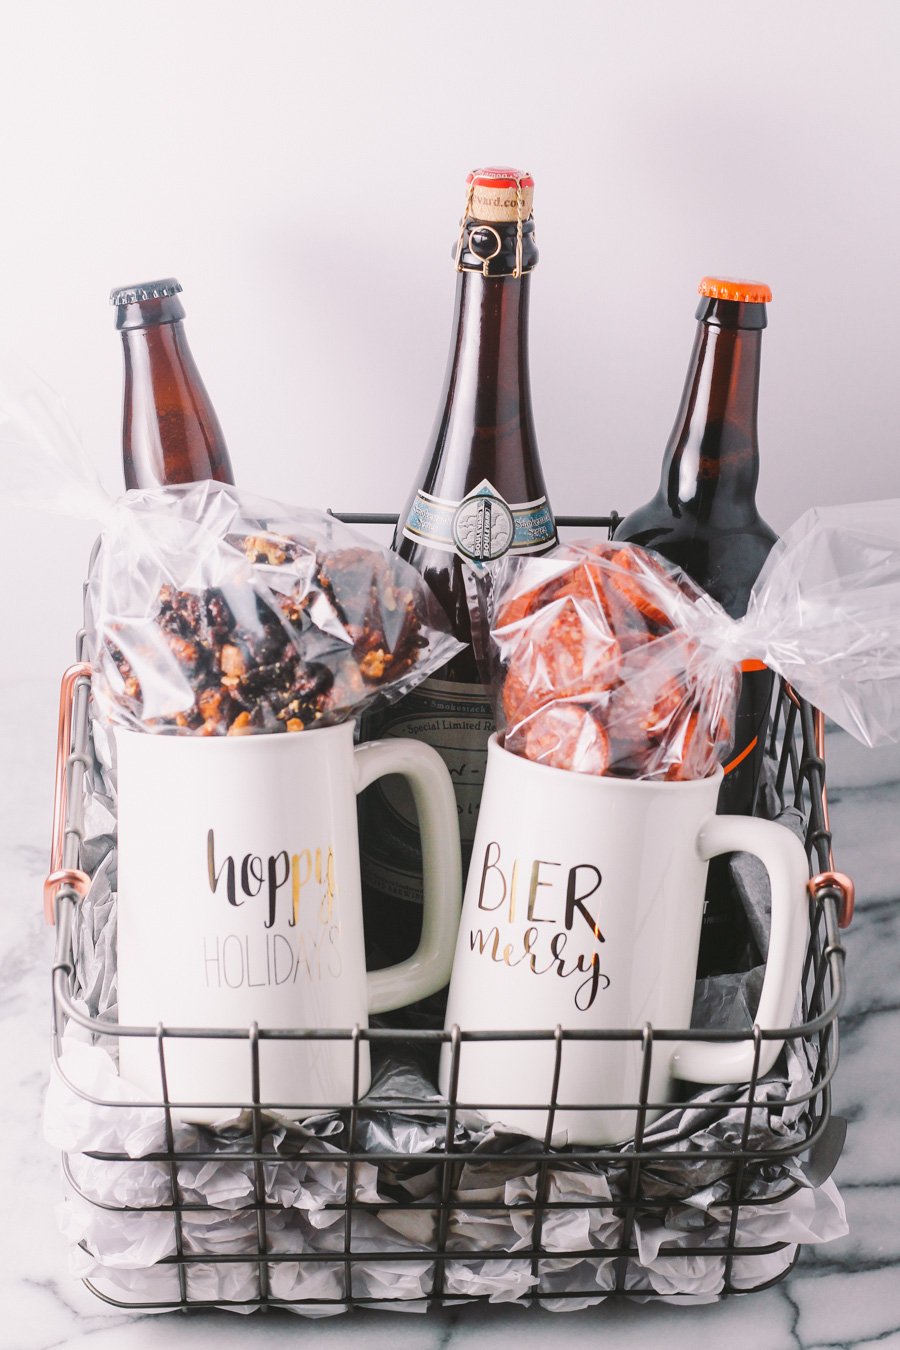 homemade holiday gift basket for the beer lover in your life | a plays well with butter holiday gift basket series | treat the beer lover in your life with a homemade beer gift basket this holiday season with the plays well with butter holiday gift basket series! pair a few great bottles of craft beer with a couple of festive beer glasses & a few handmade bar snacks & you'll totally knock the socks off of any beer nerd!